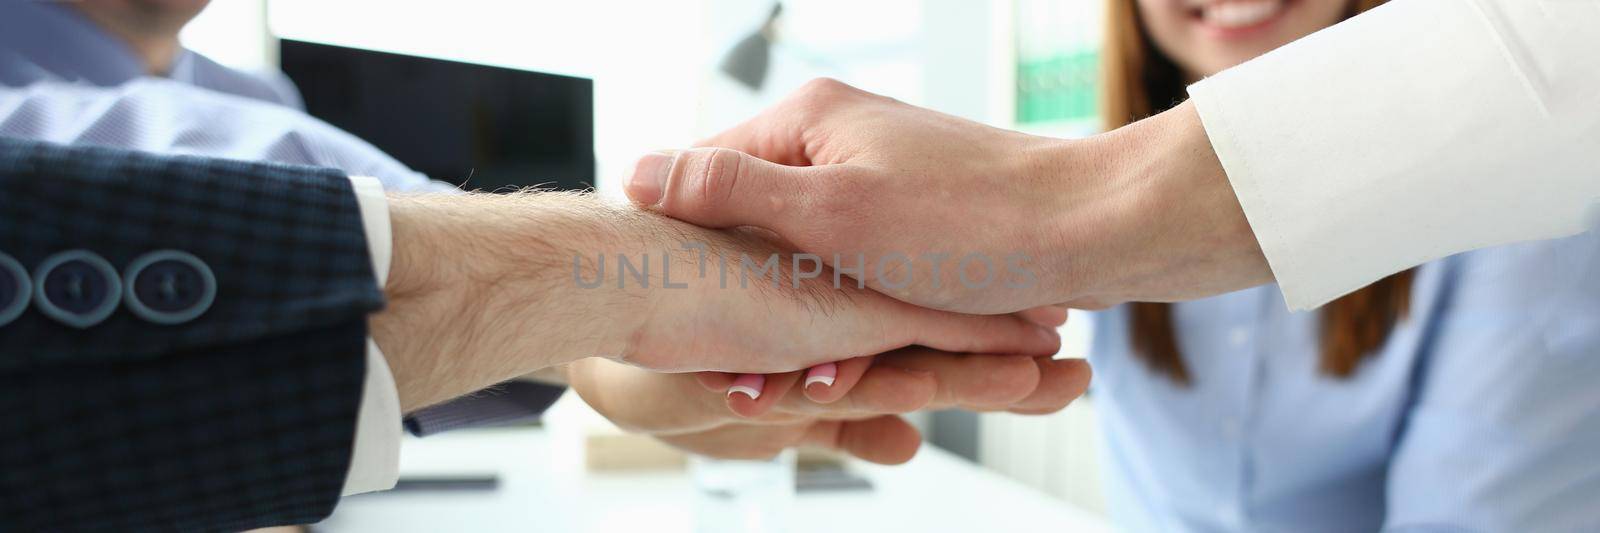 Focus on folded hands on each other. Businessmen discussing stipulation of profitable contract and closing bargain. Business meeting concept. Blurred background